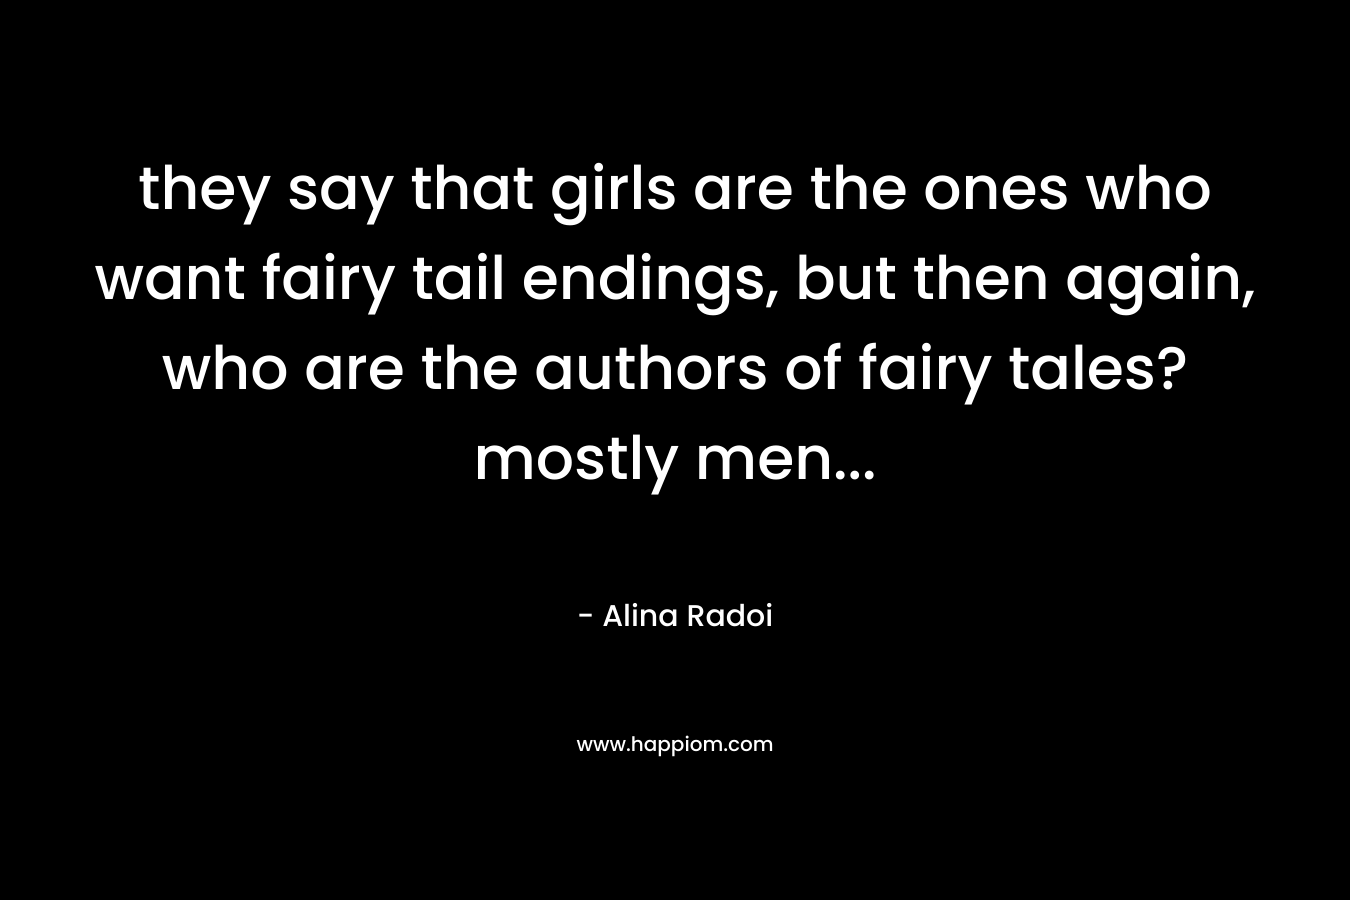 they say that girls are the ones who want fairy tail endings, but then again, who are the authors of fairy tales? mostly men… – Alina Radoi